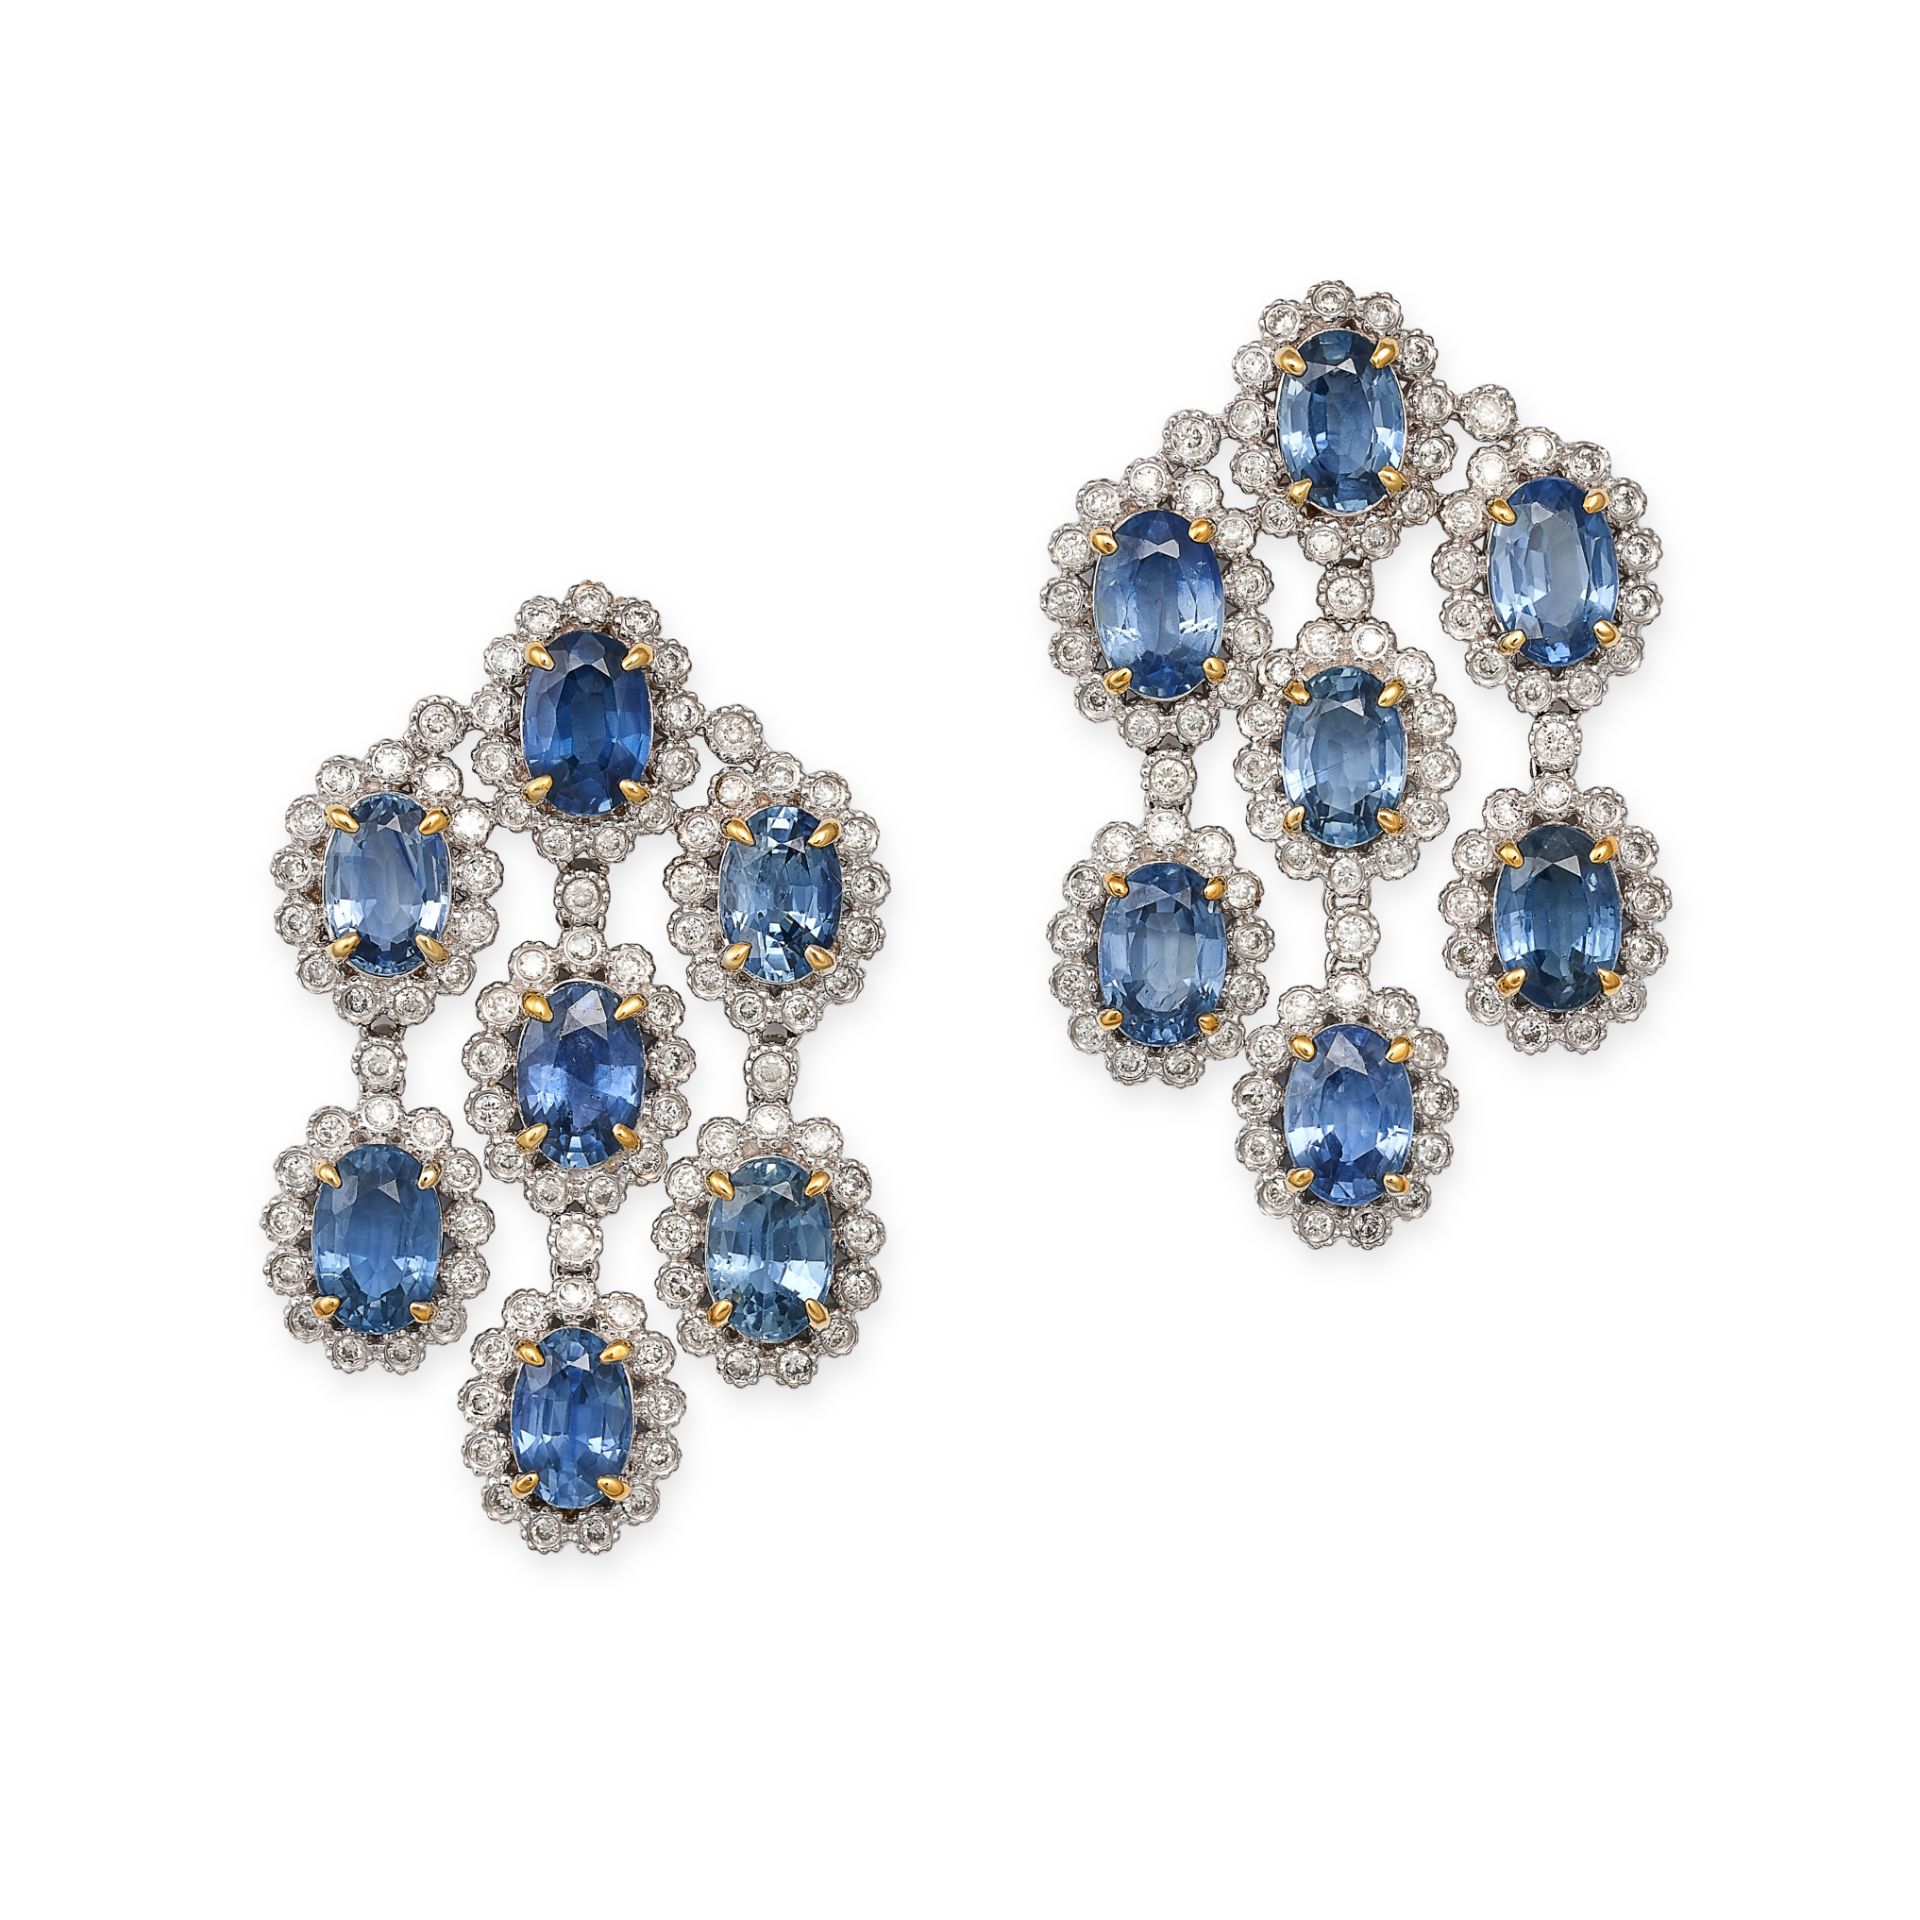 A PAIR OF SAPPHIRE AND DIAMOND CHANDELIER EARRINGS in 18ct white gold, each set with seven oval